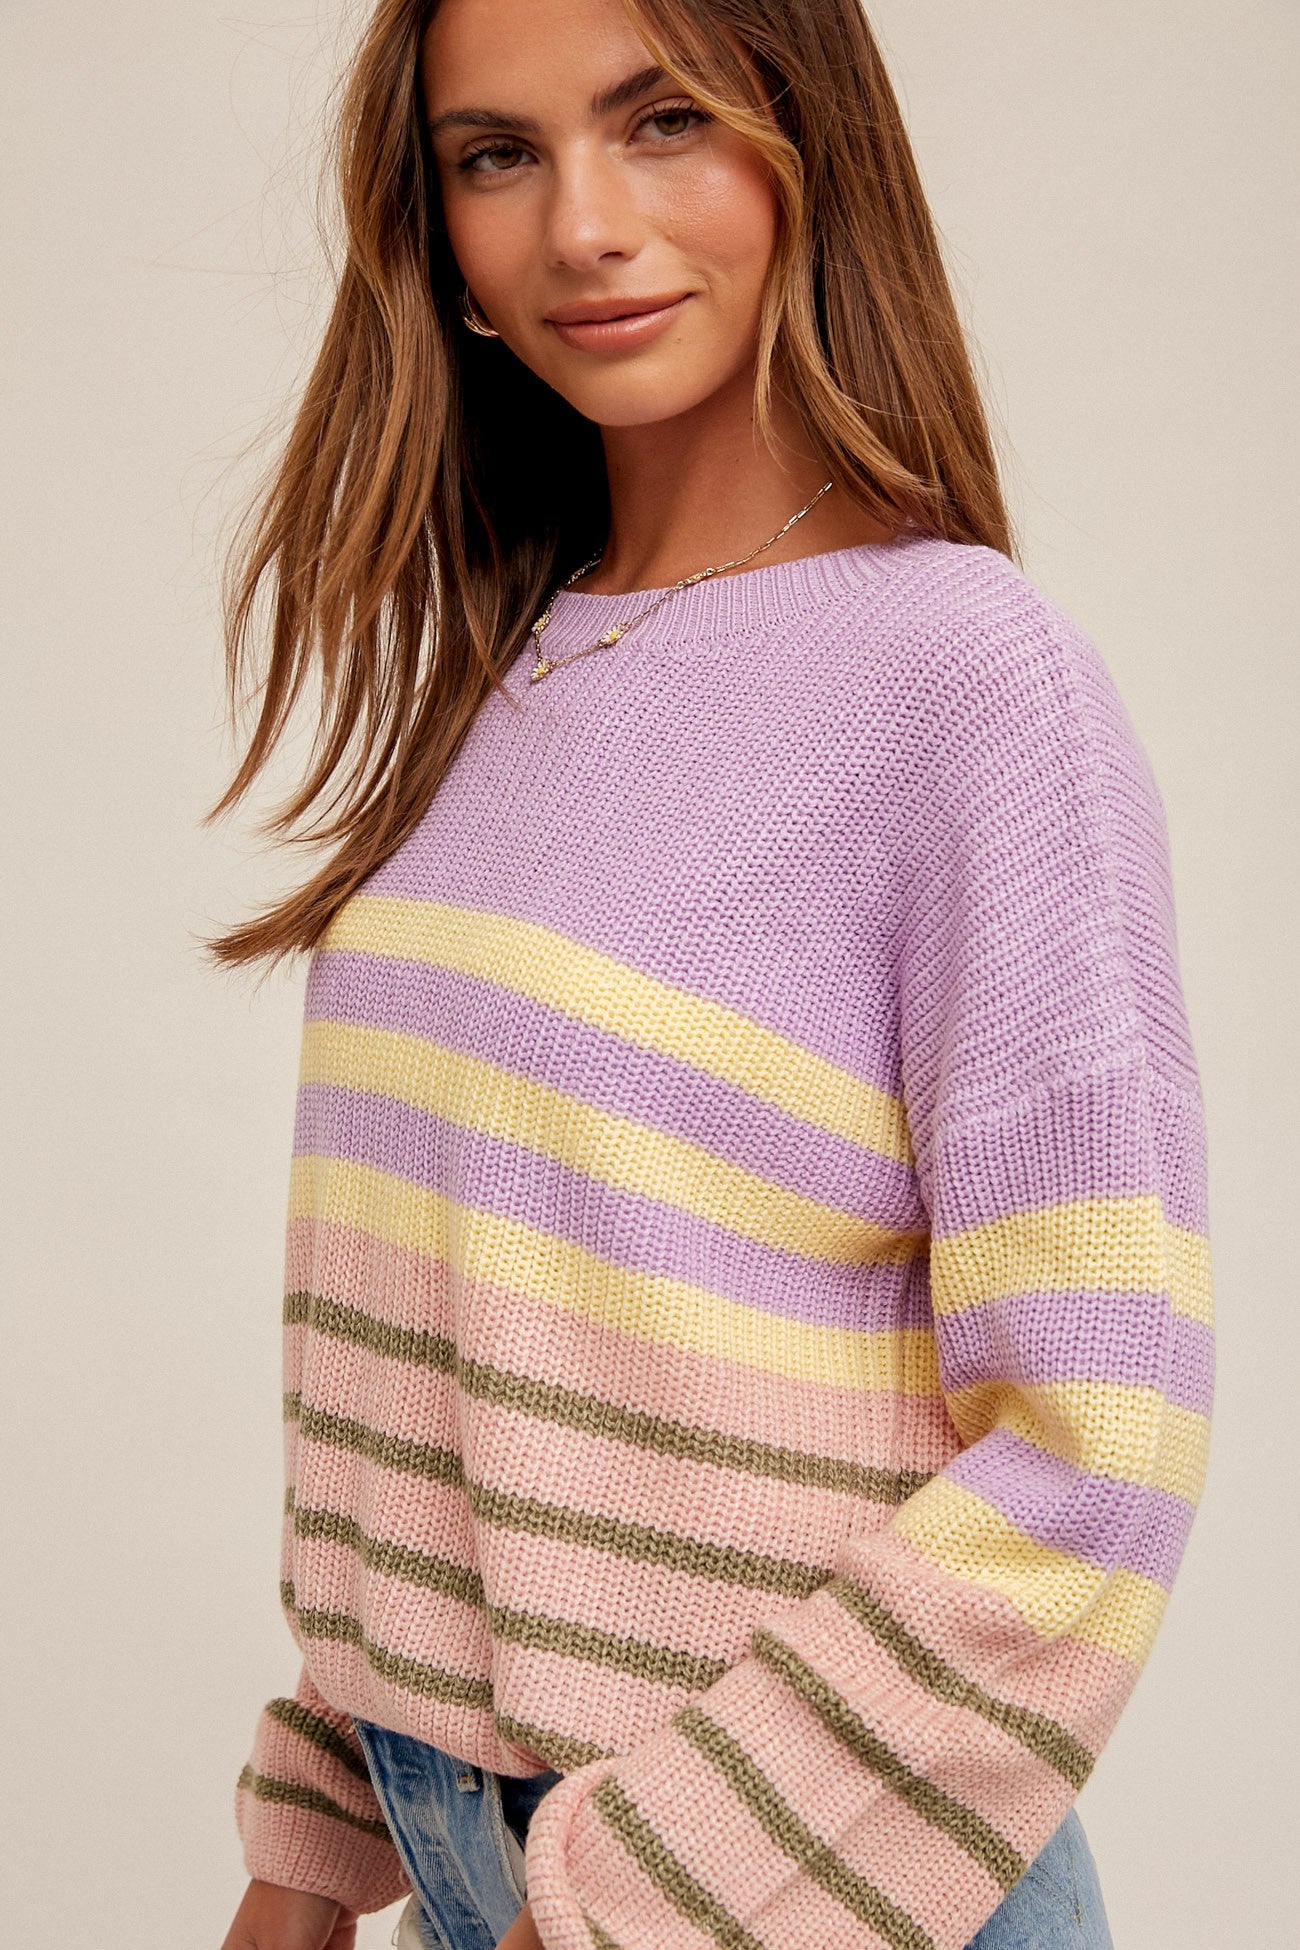 Feeling Springy Striped Sweater